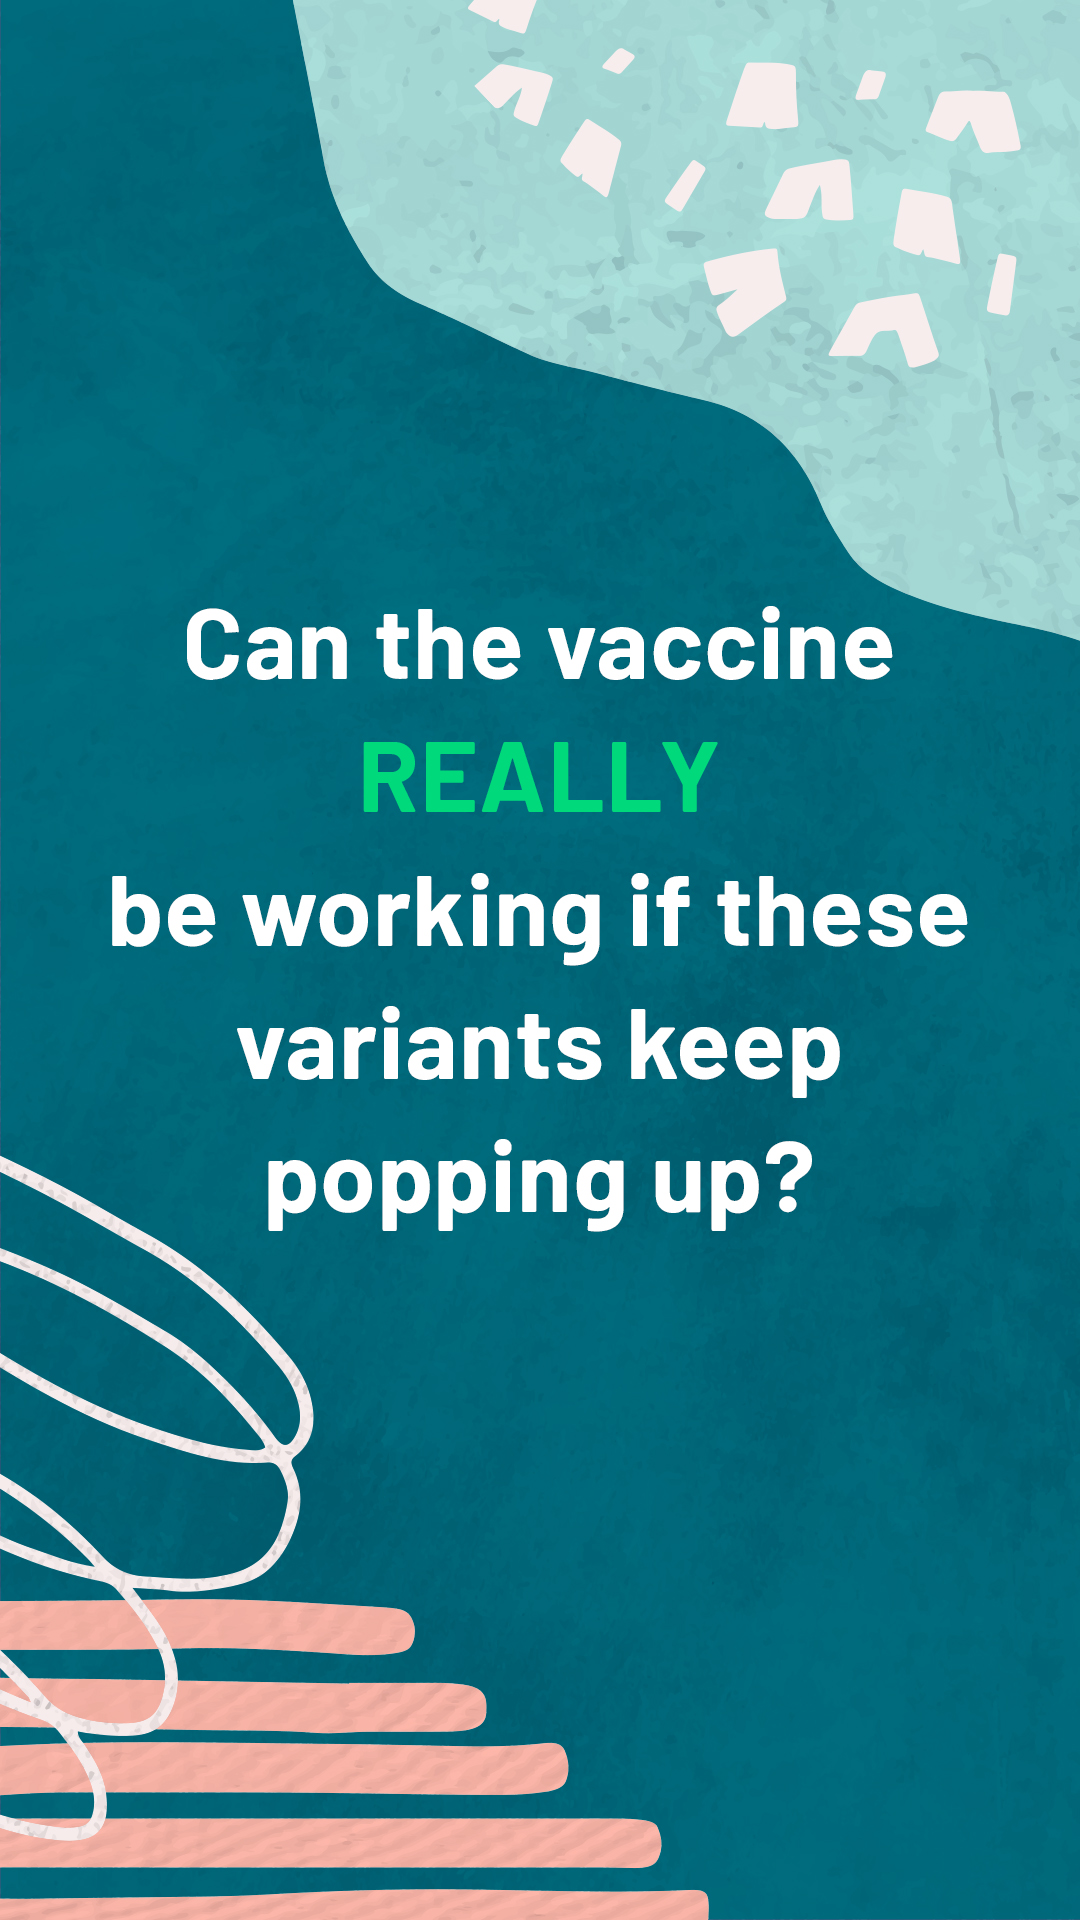 Can the vaccine really be working if these variants keep popping up